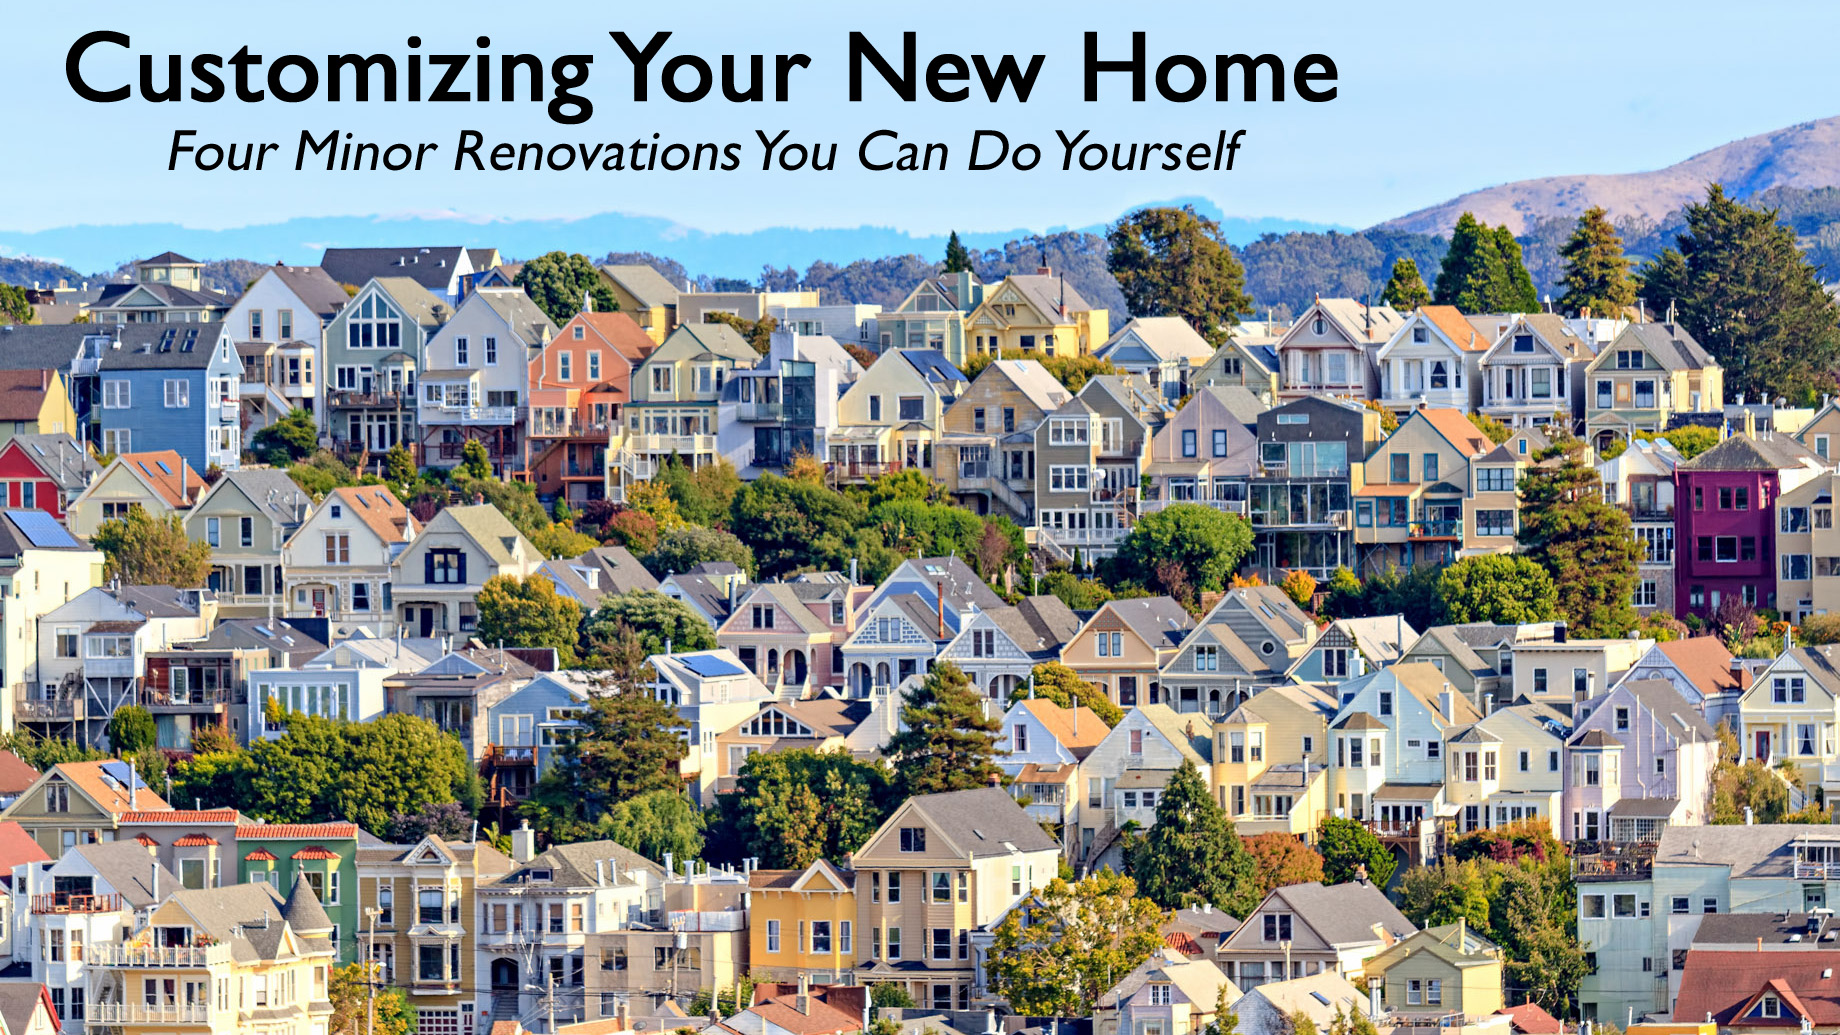 Customizing Your New Home - Four Minor Renovations You Can Do Yourself